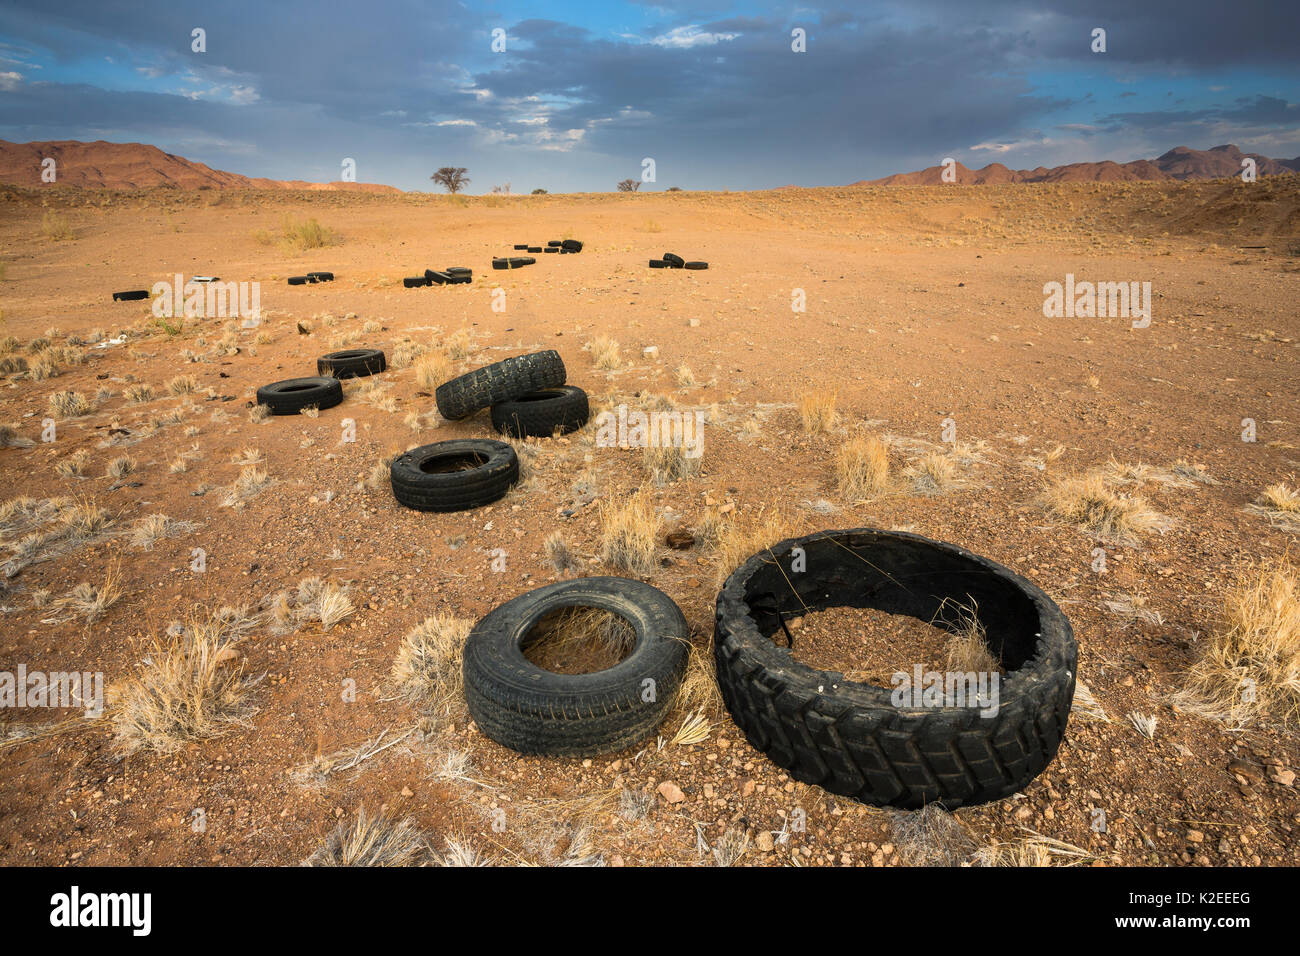 Pollution in the Namib Desert, due to illegal dumping of old tires. Namibia. Stock Photo